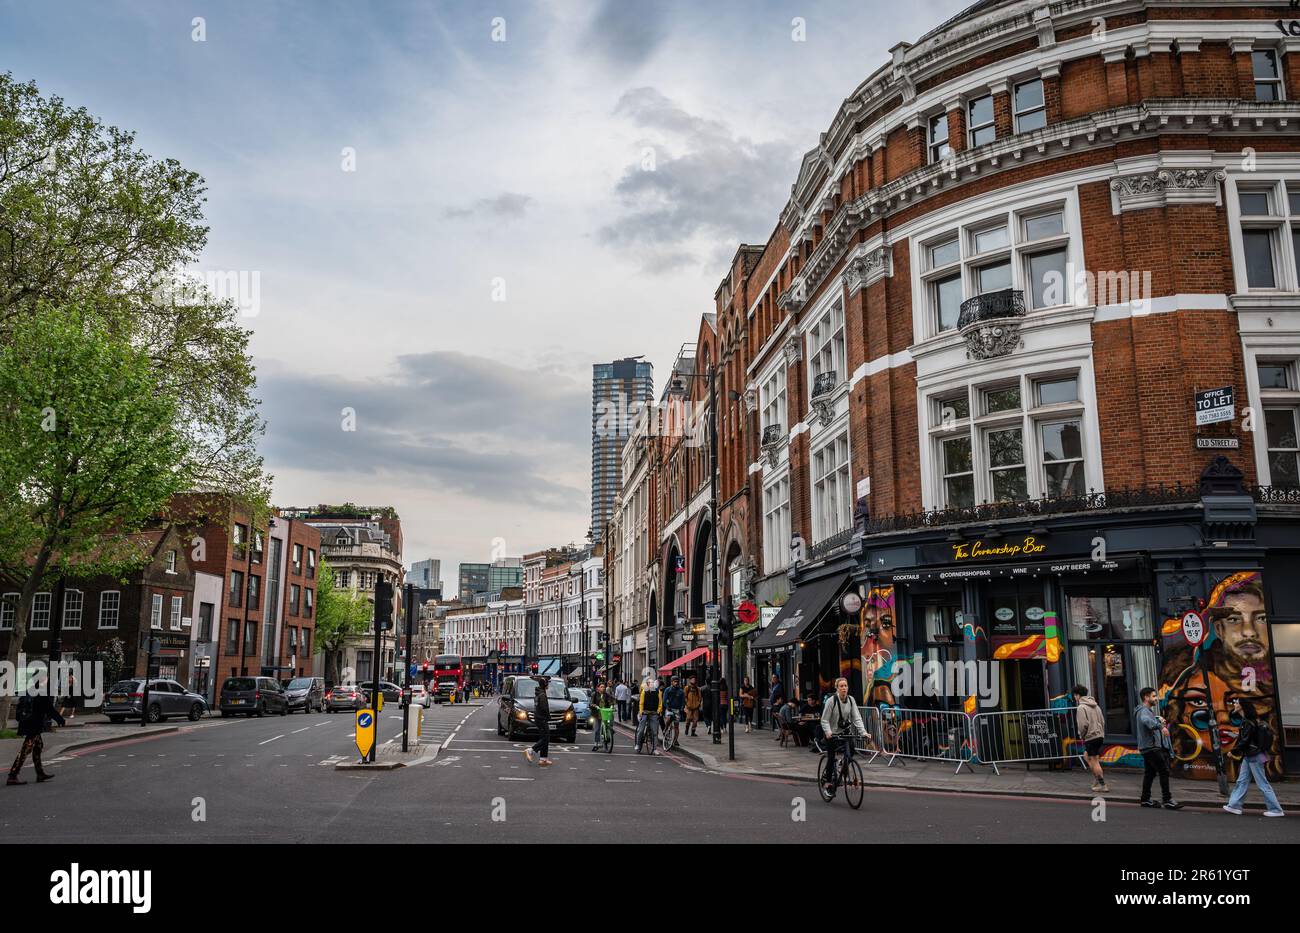 London, UK: Looking south along Shoreditch High Street in London with restaurants, bars and shops. Junction with Old Street. Stock Photo